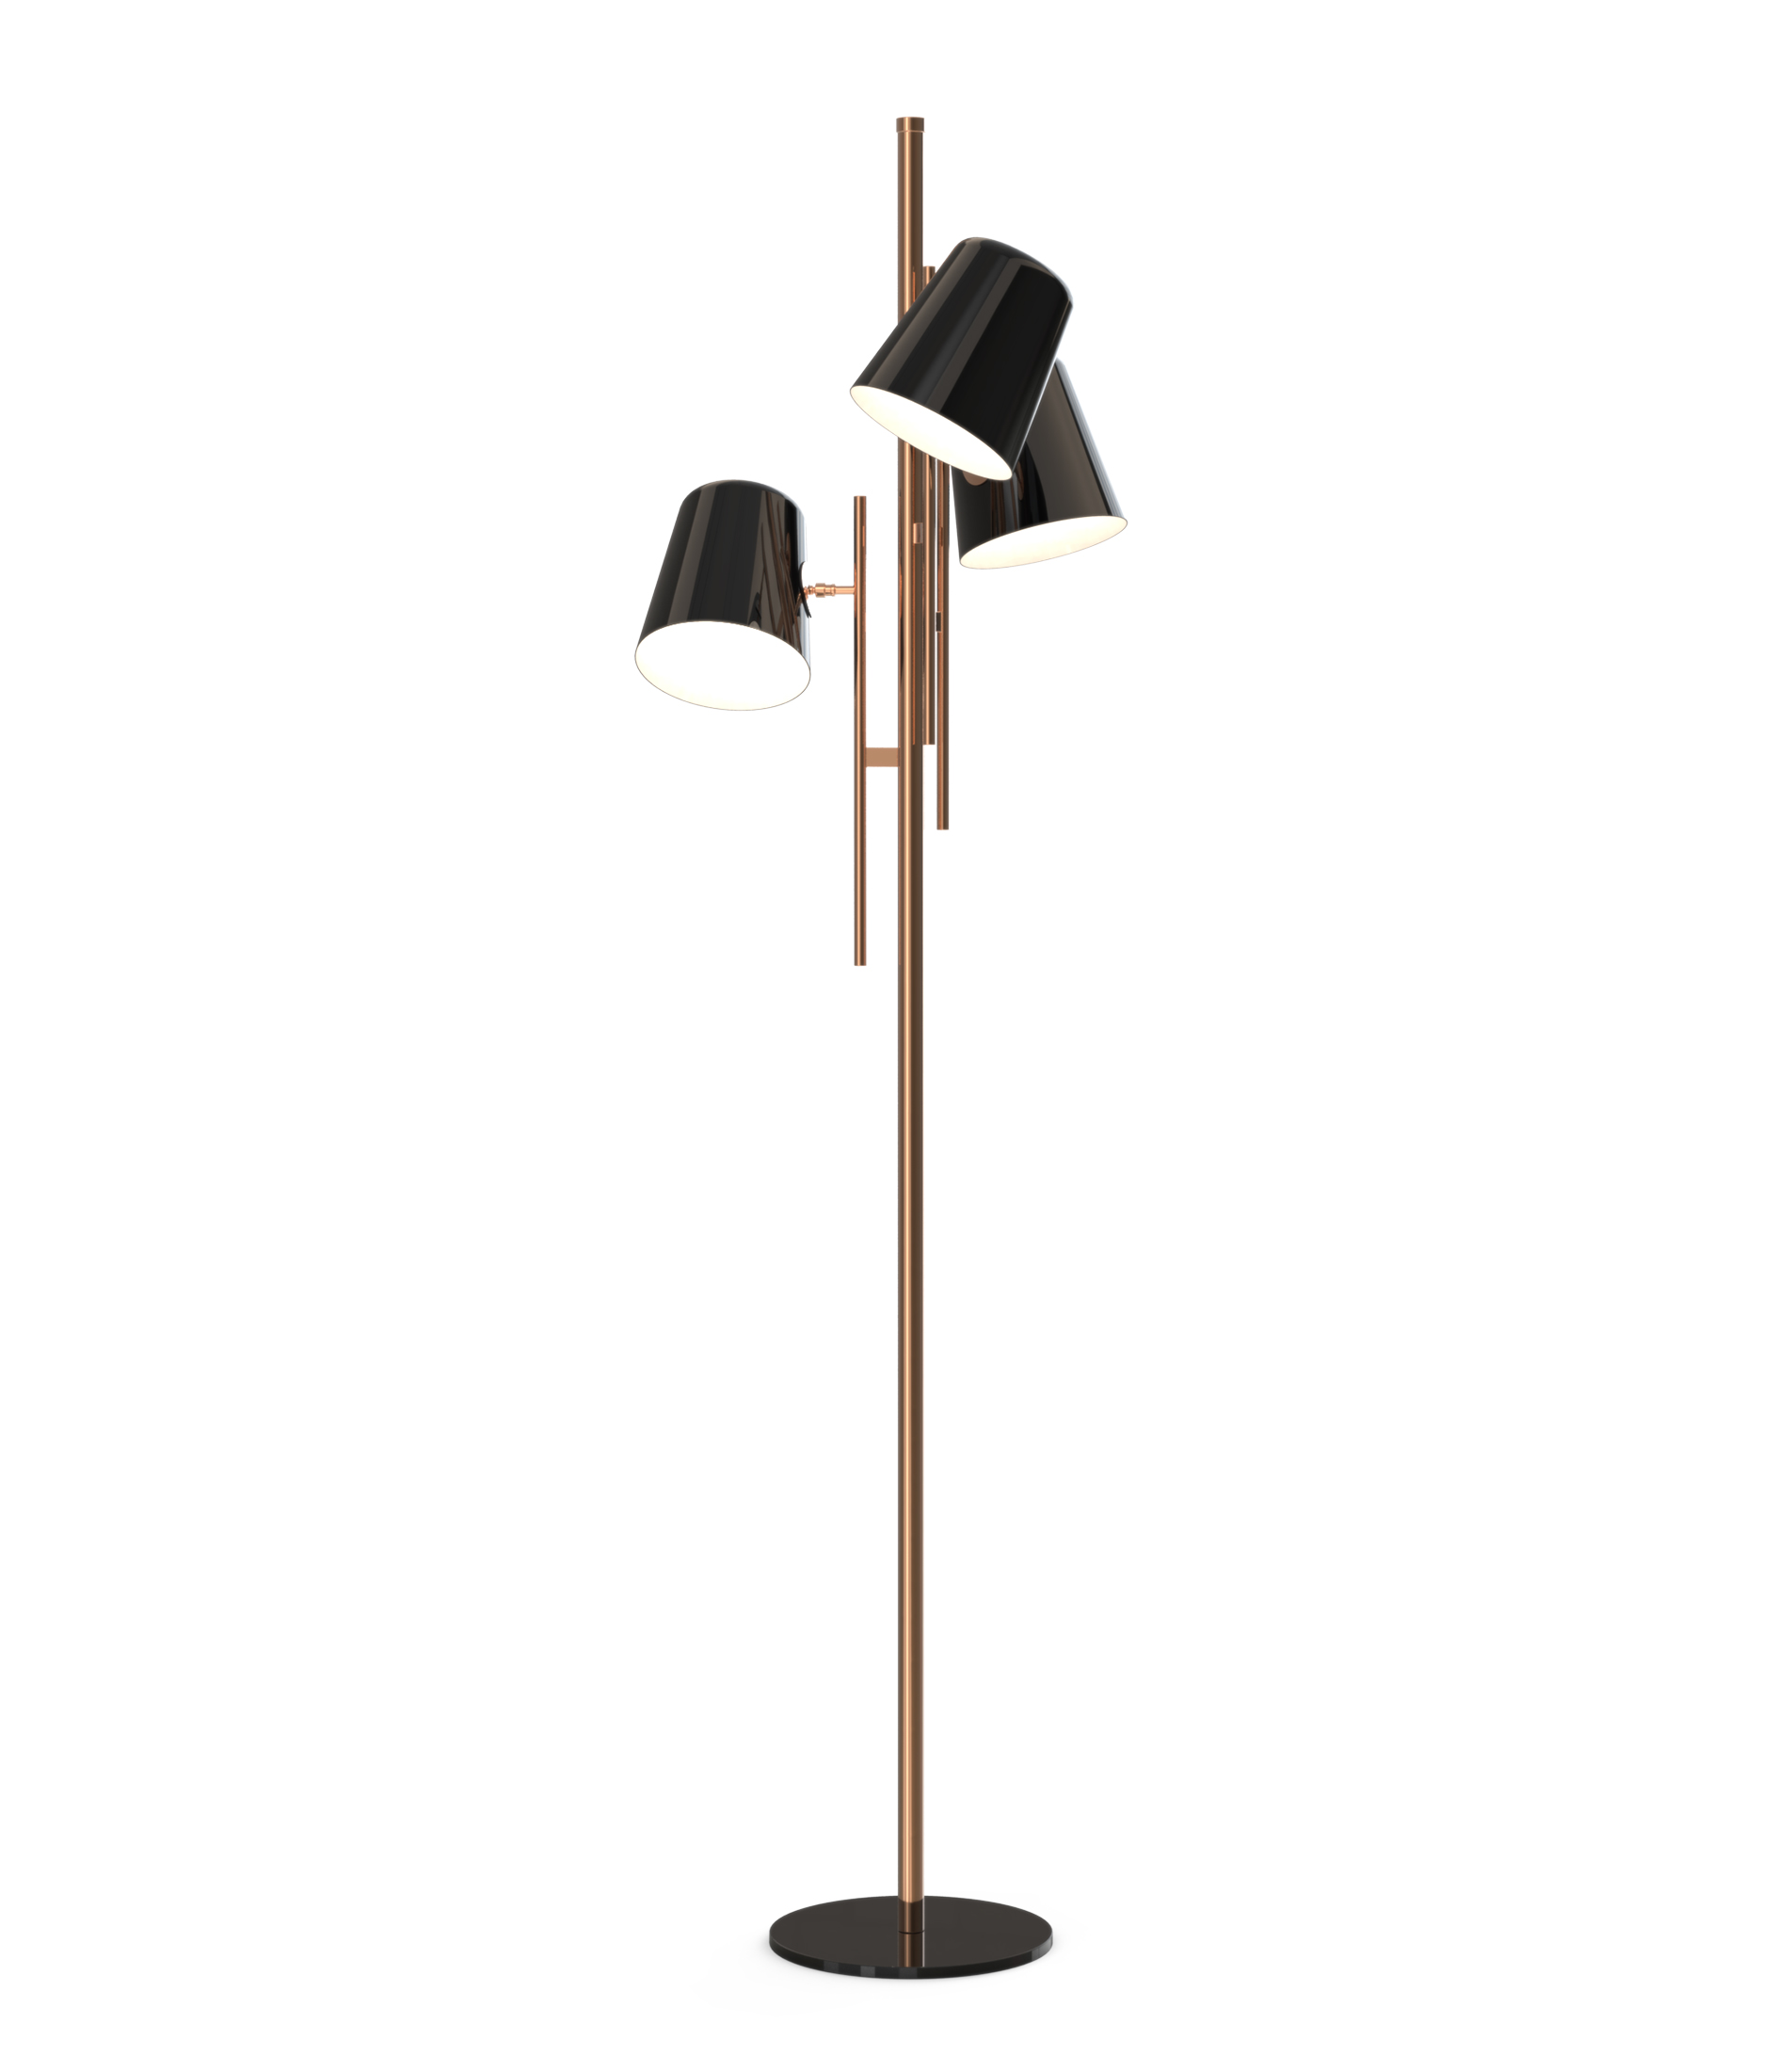 Home Design Ideas Mid-Century Floor Lamps That You'll Love 1